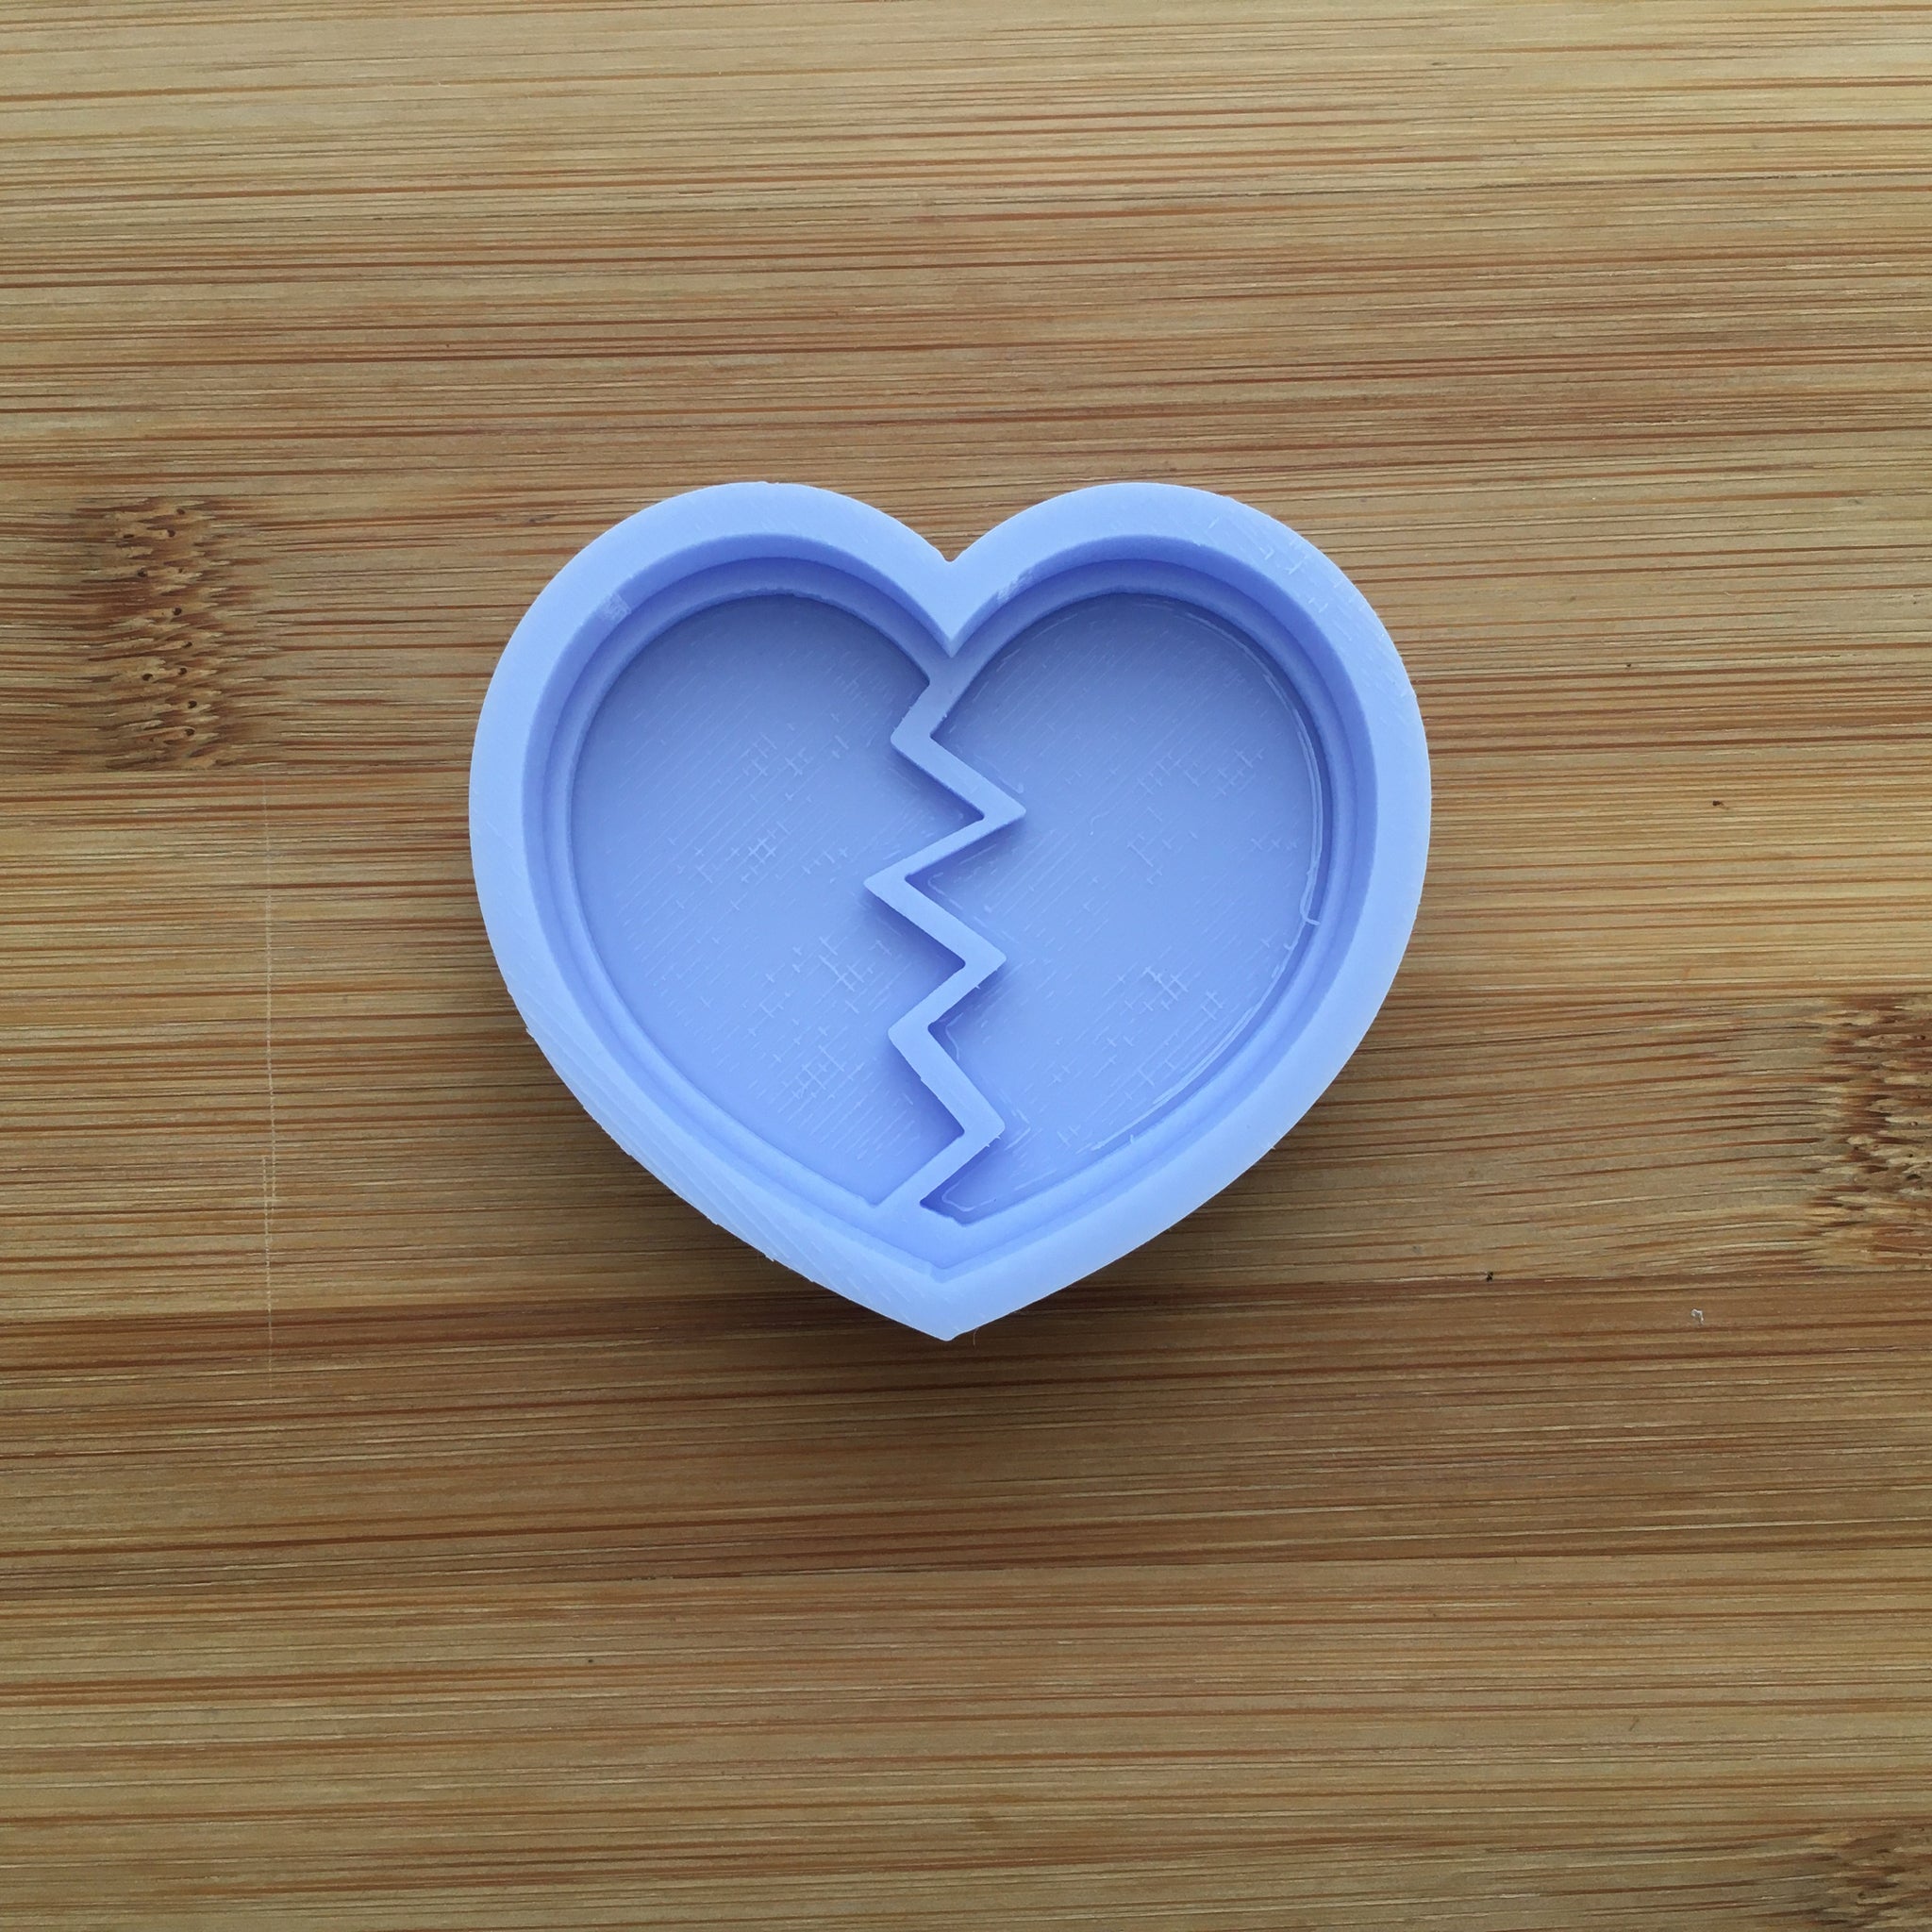 Heart-Shaped Silicone Mold, Craft Supplies